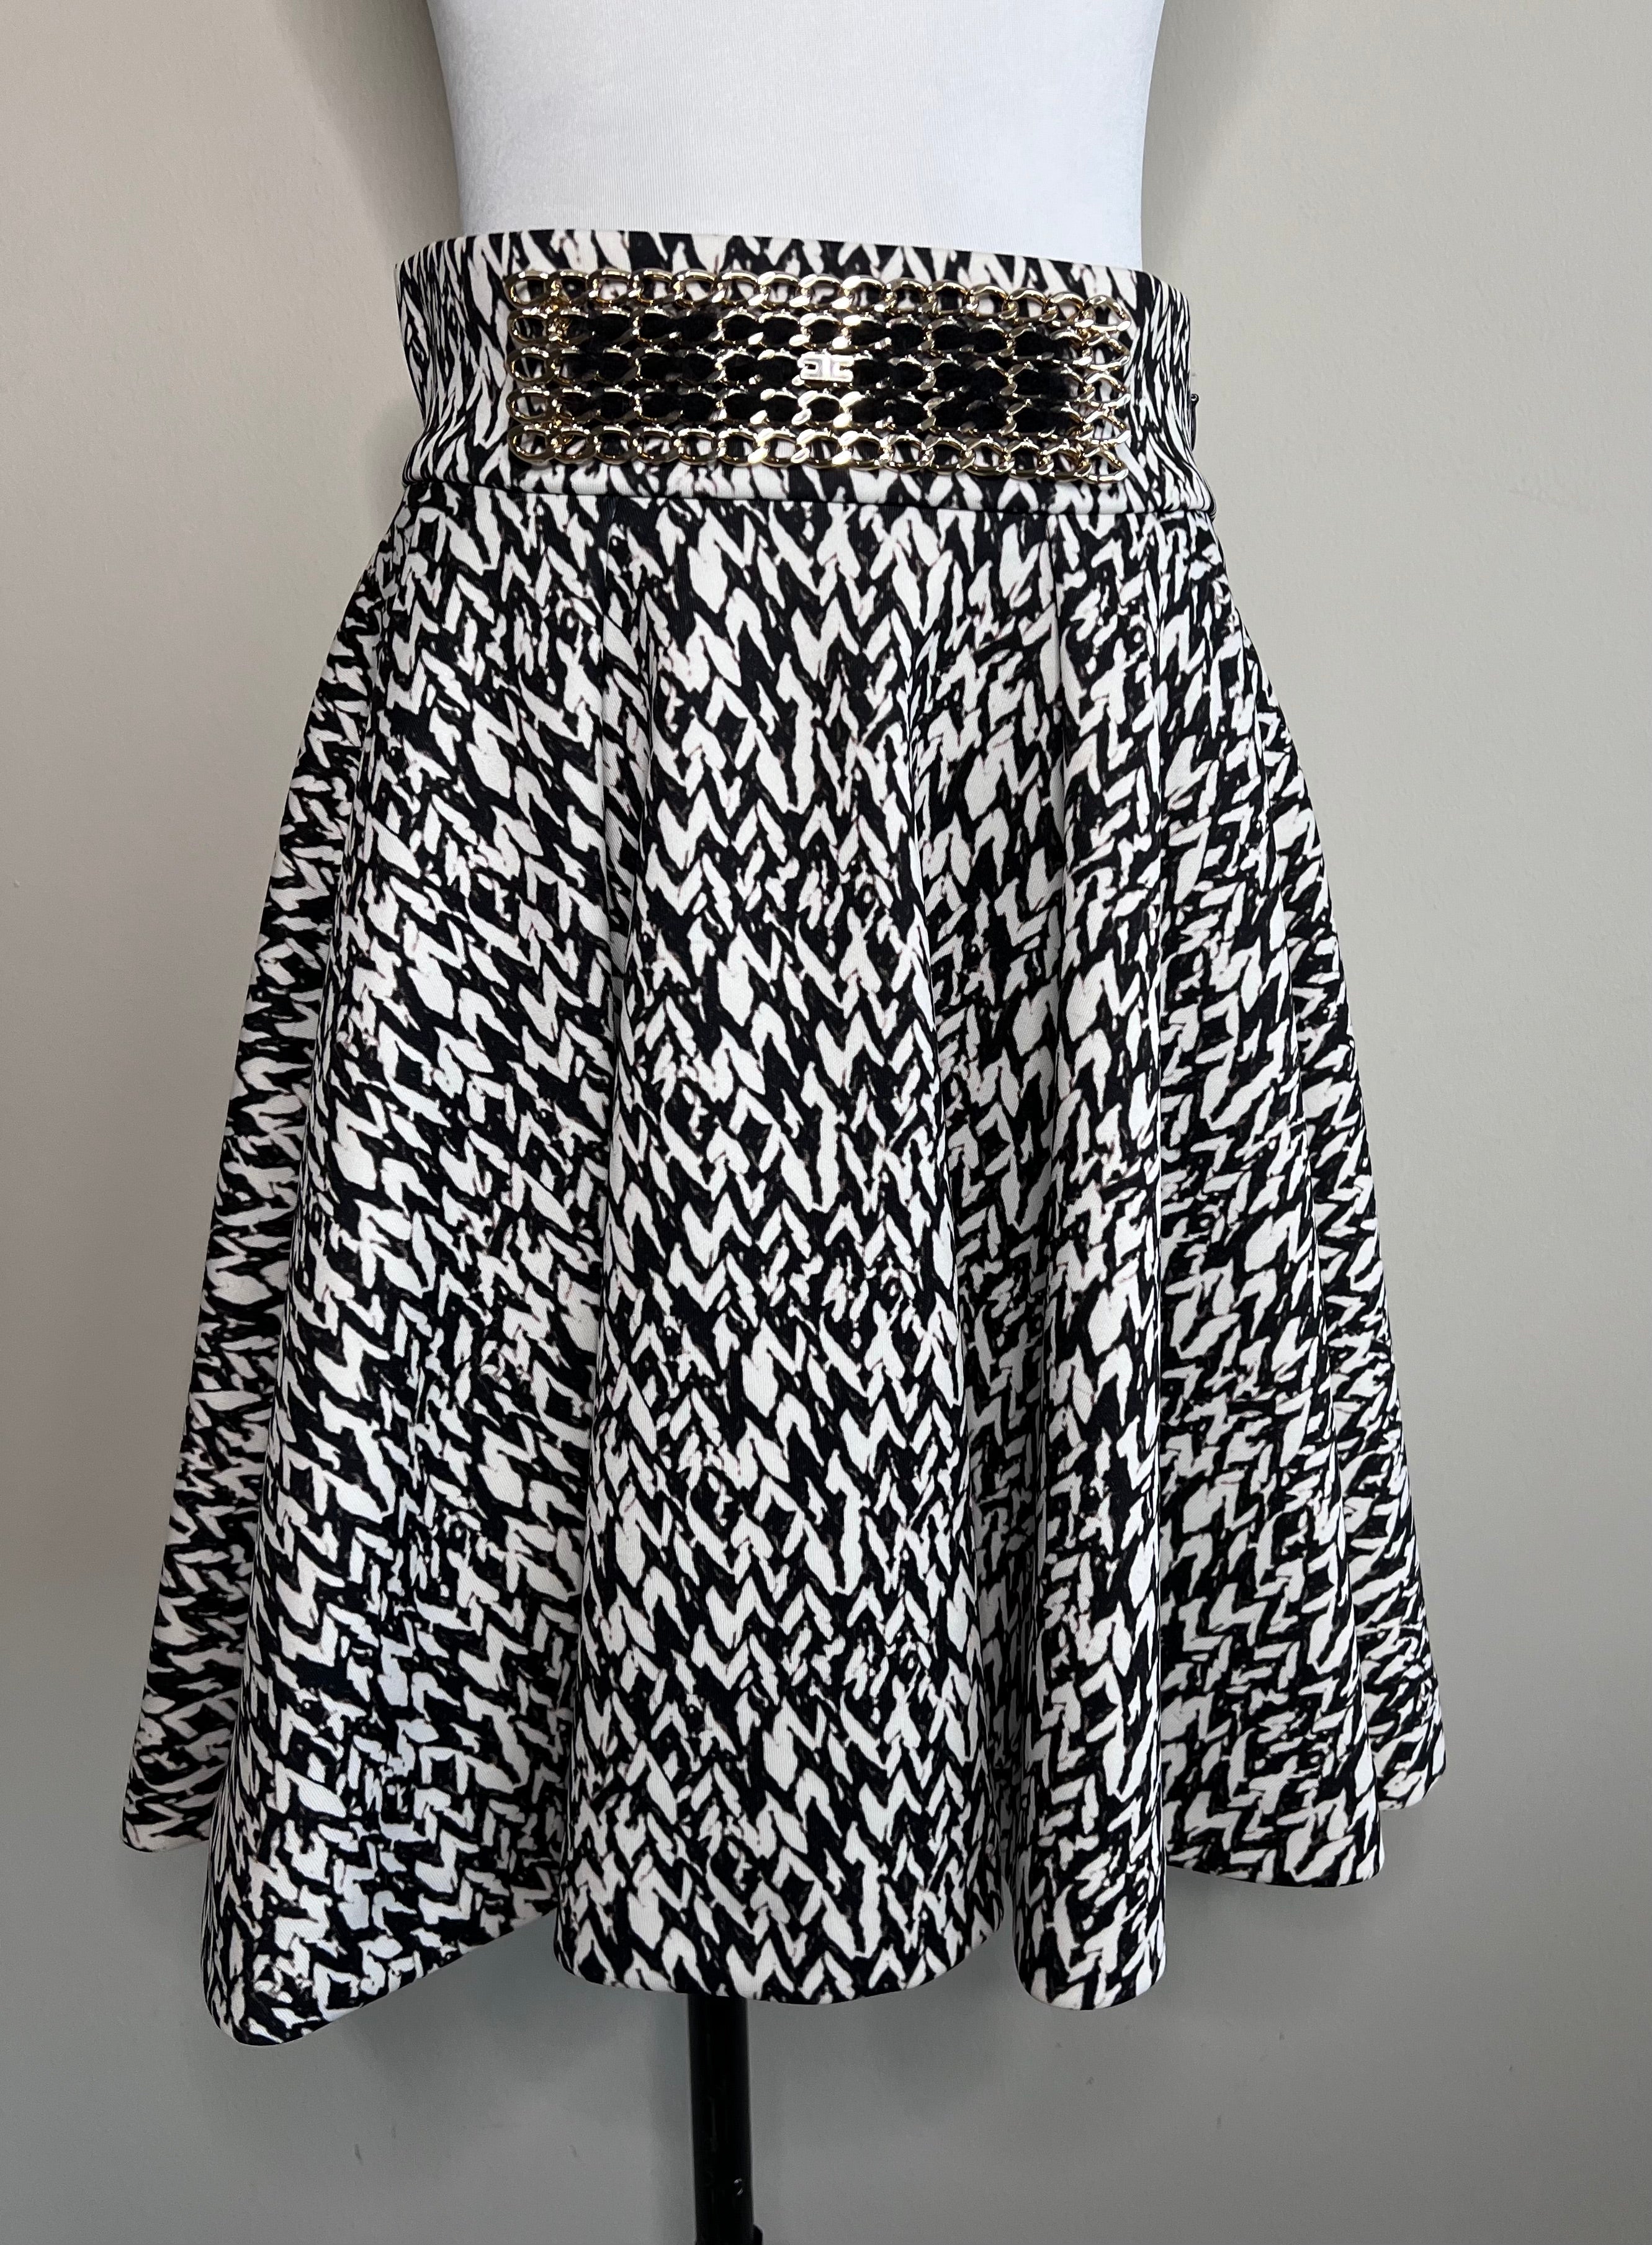 Black and white printed pleated skirt with metal waist design - ELISABETTA FRANCHI